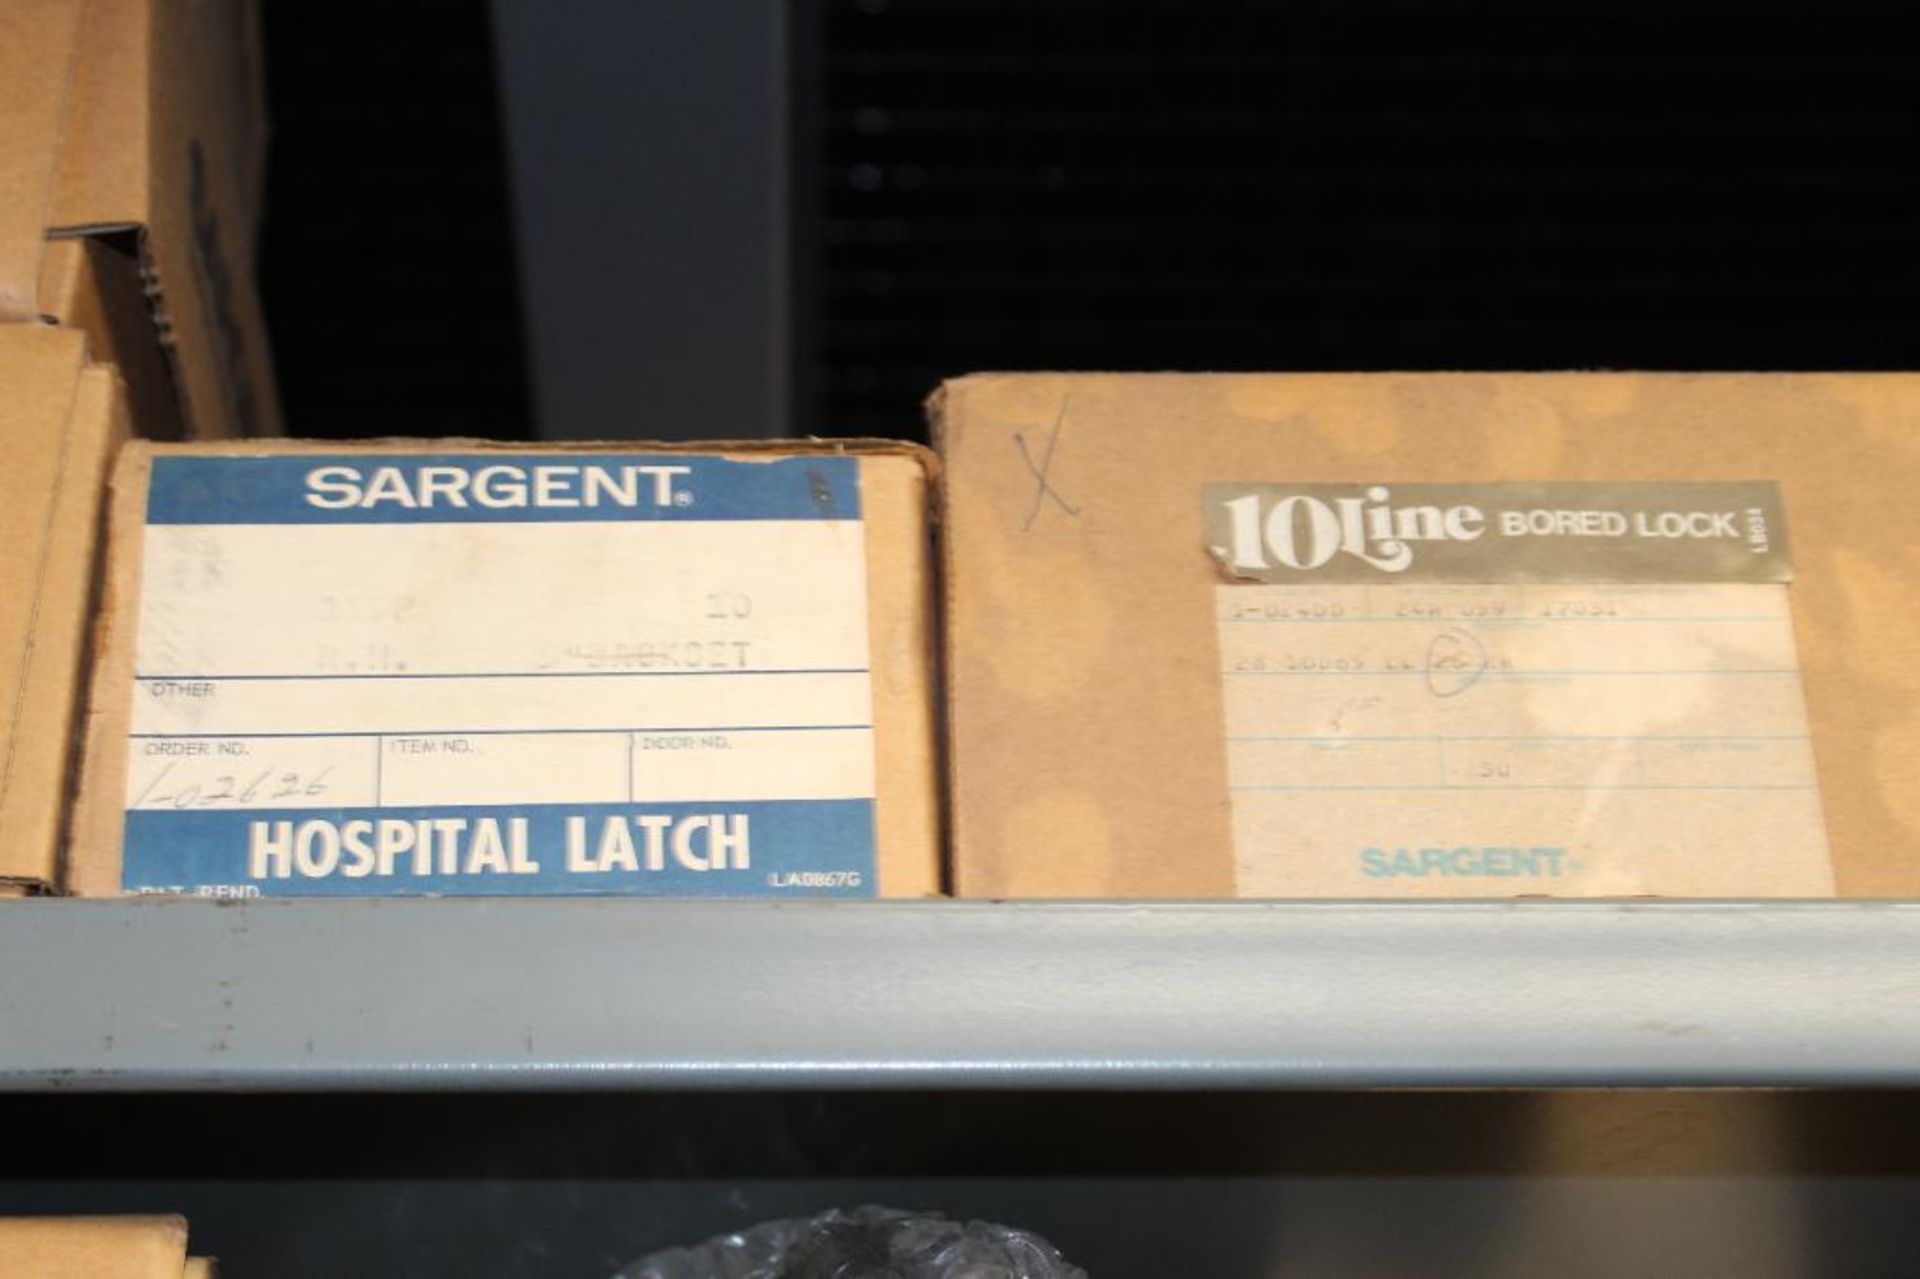 Lot of (7) Sargent Cylindrical and Bored Lock Hospital Latches Model: 114-2428R-26D - Image 4 of 9